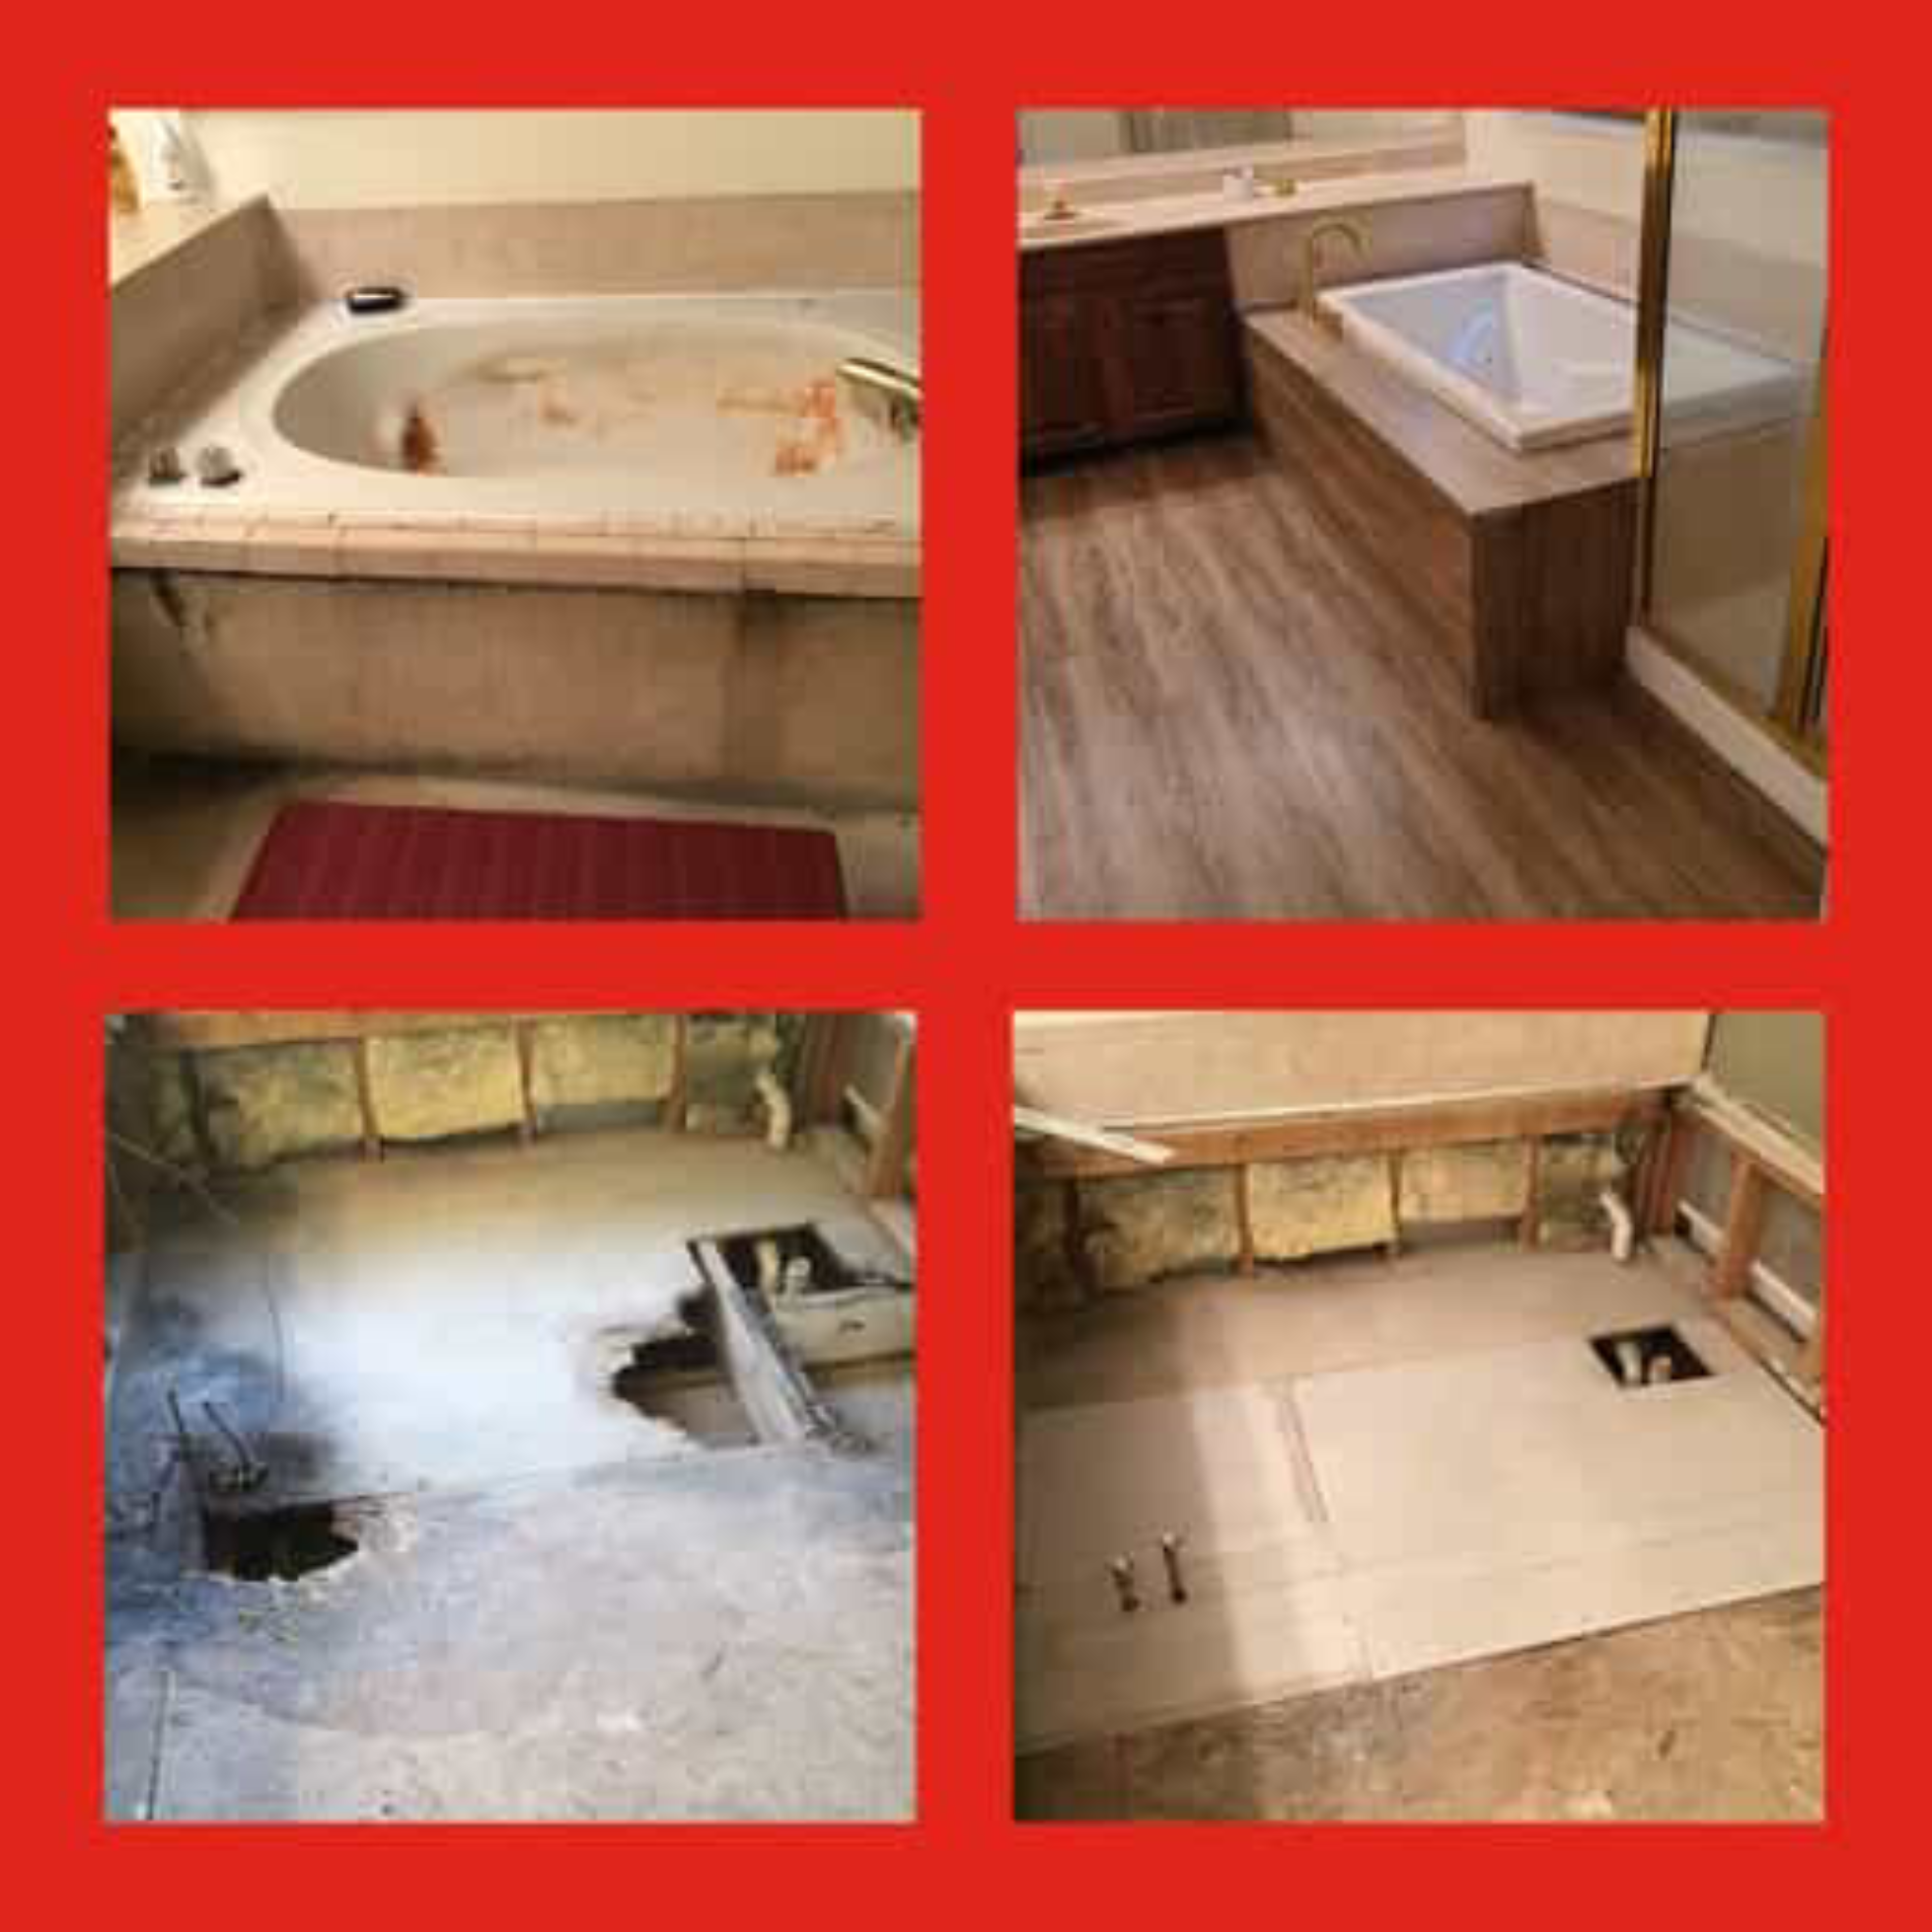  A bathroom with a damaged, rusty tub and ruined subfloor, and the same bathroom after the tub and flooring have been replaced by Mr. Handyman.